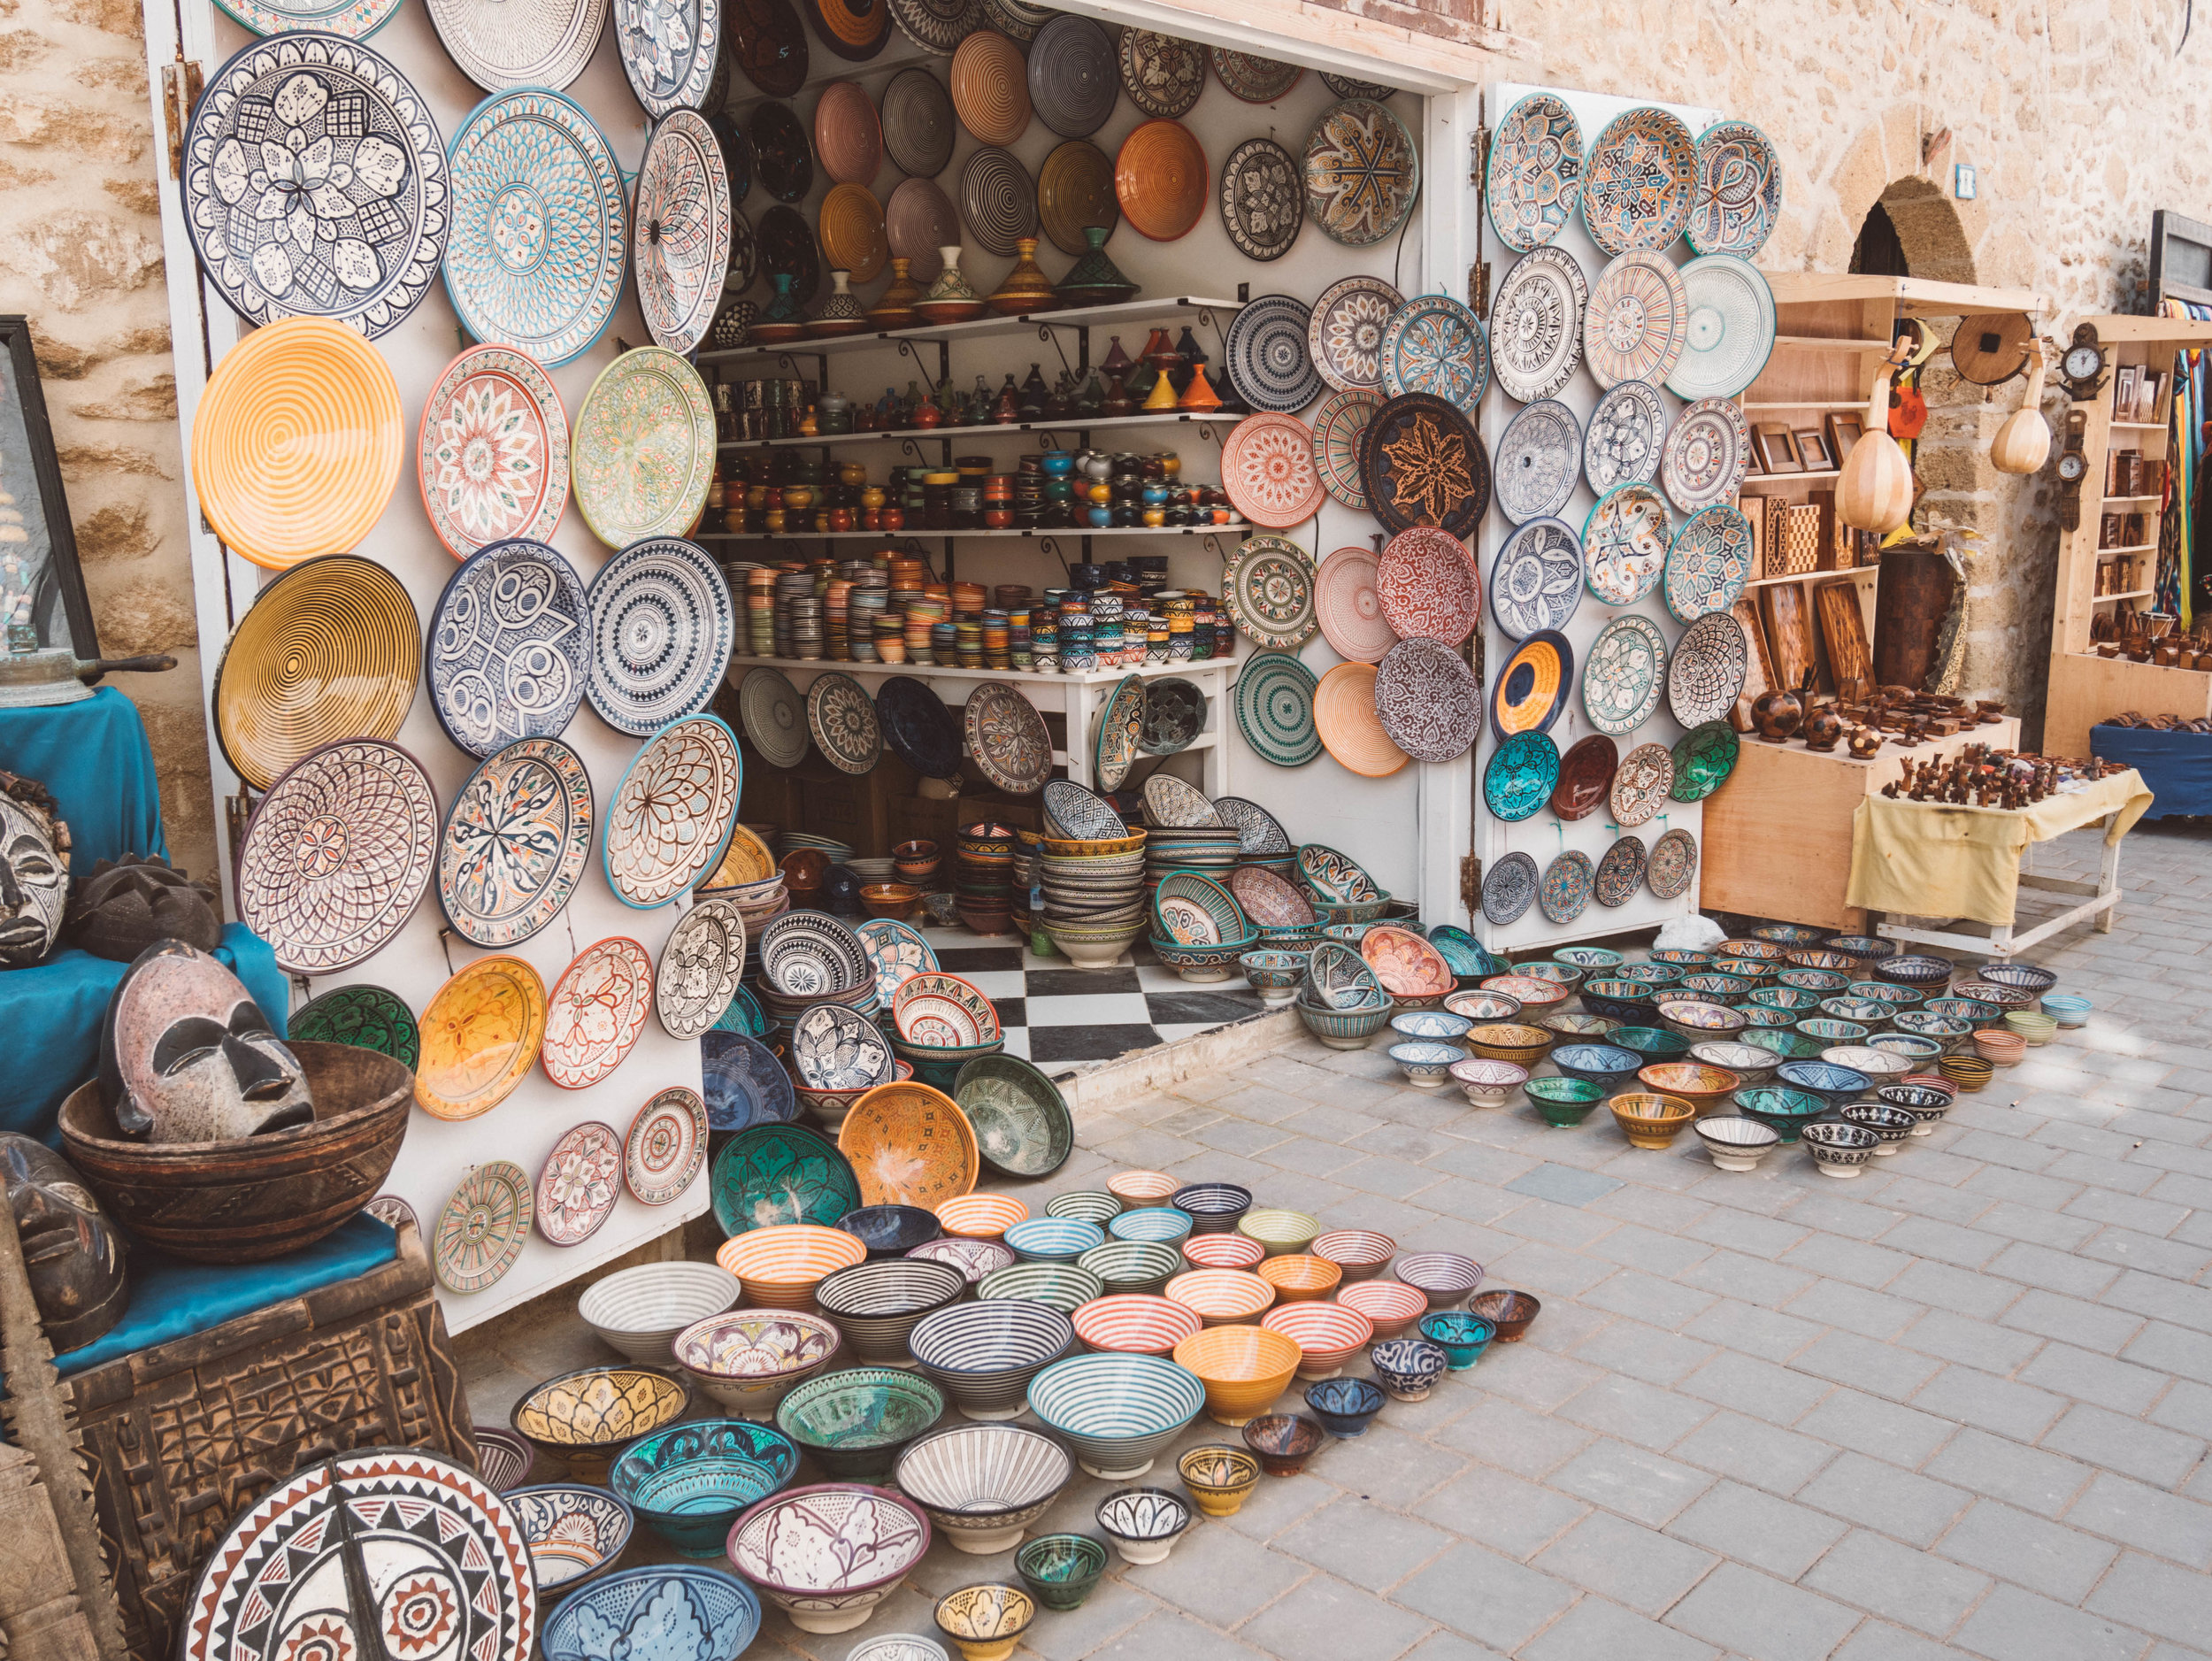 Porcelaine and Dishes - Old Souqs - City Walls - Essaouira - Morocco